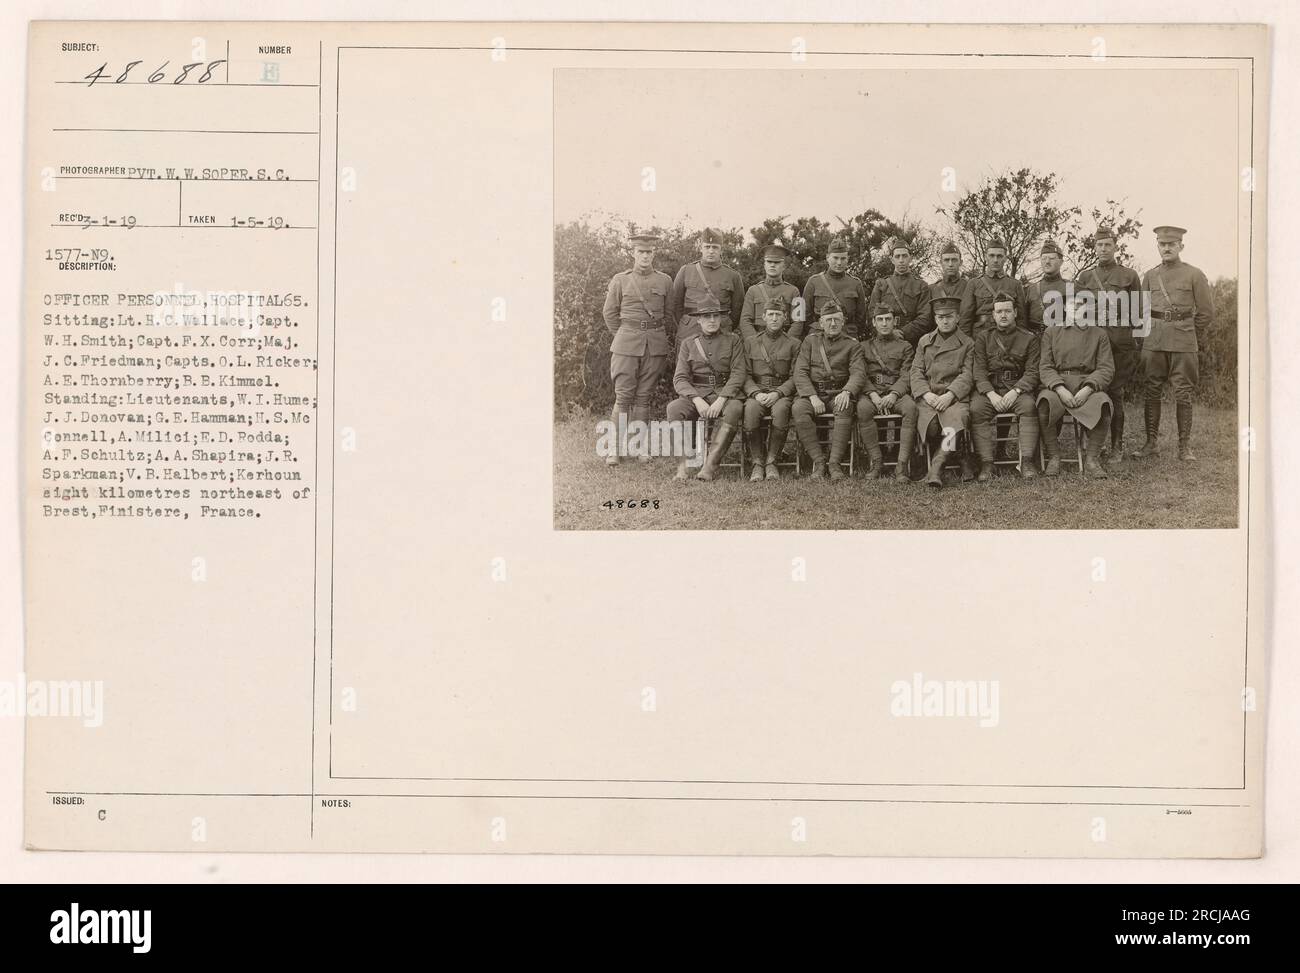 Officer personnel and doctors pose for a photograph at Hospital 65 located in Kerhoun, eight kilometers northeast of Brest, Finistere, France. Captains, lieutenants, and a major are among those featured in the image. The photograph was taken on January 5, 1919, by W. W. SOPER.S.C. MEDZ1-19 1577-19. Stock Photo